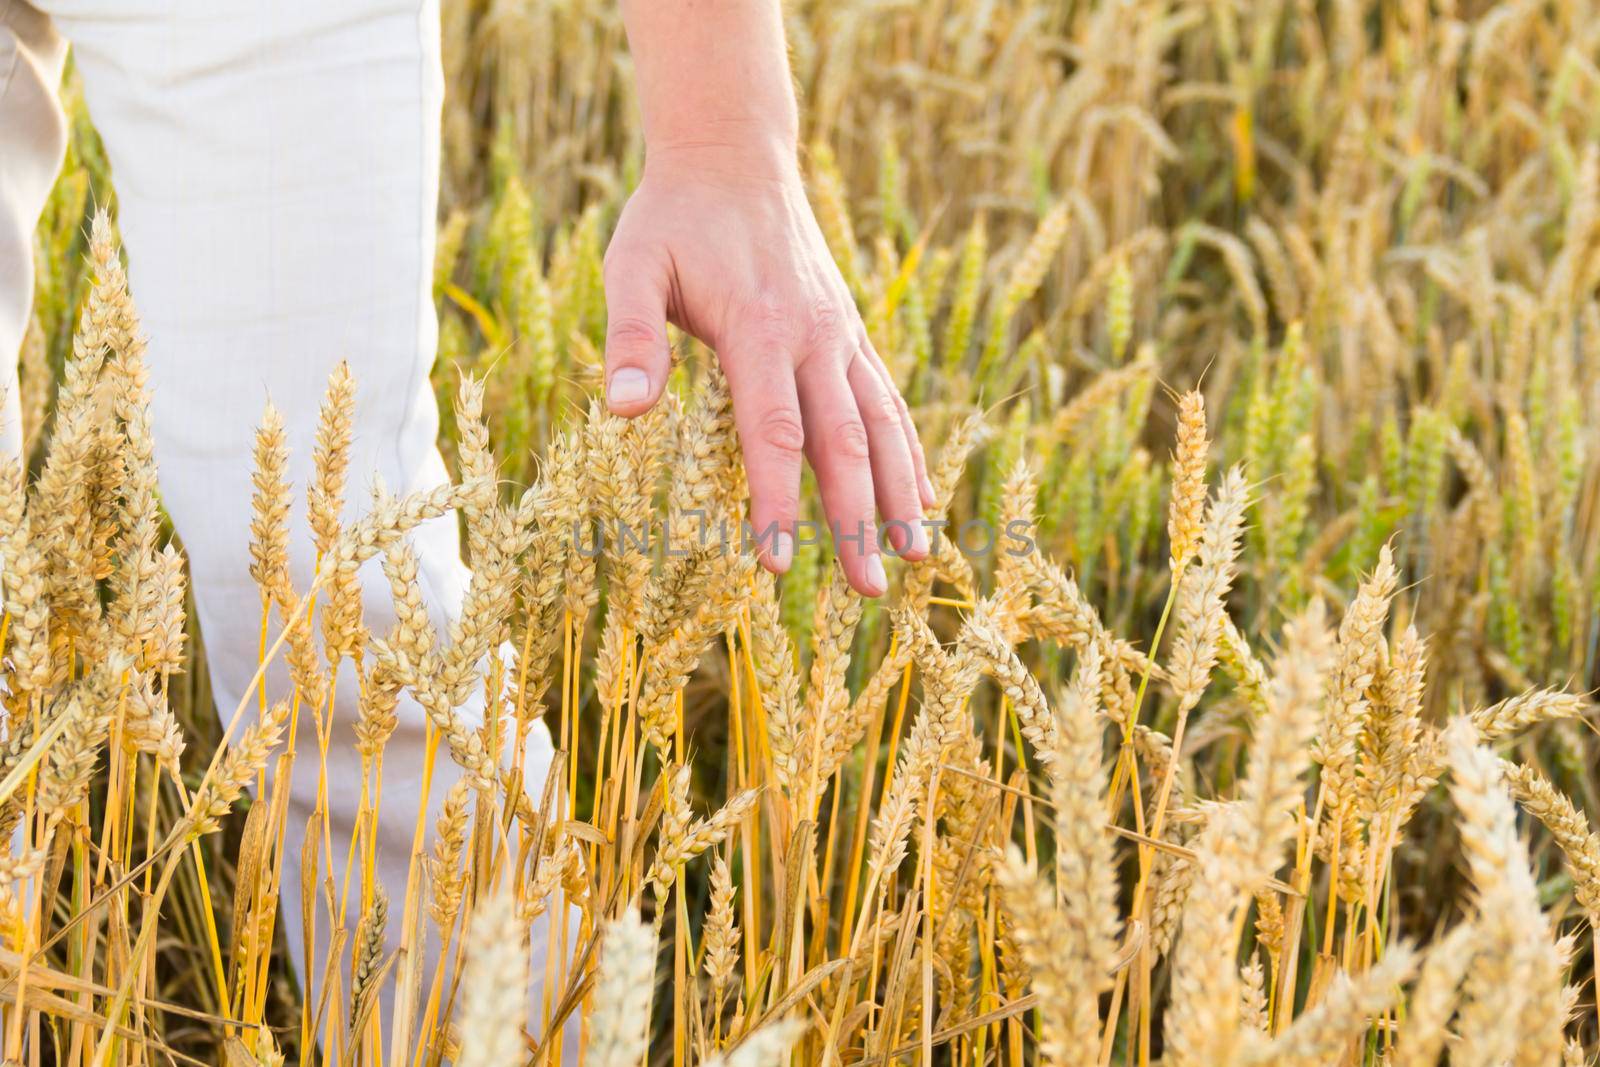 Wheat ears close-up against the background of the setting sun, blue sky and sunlight. The hand holds a bouquet of wheat. It's time to harvest. The food crisis in the world. A field for harvesting bread.